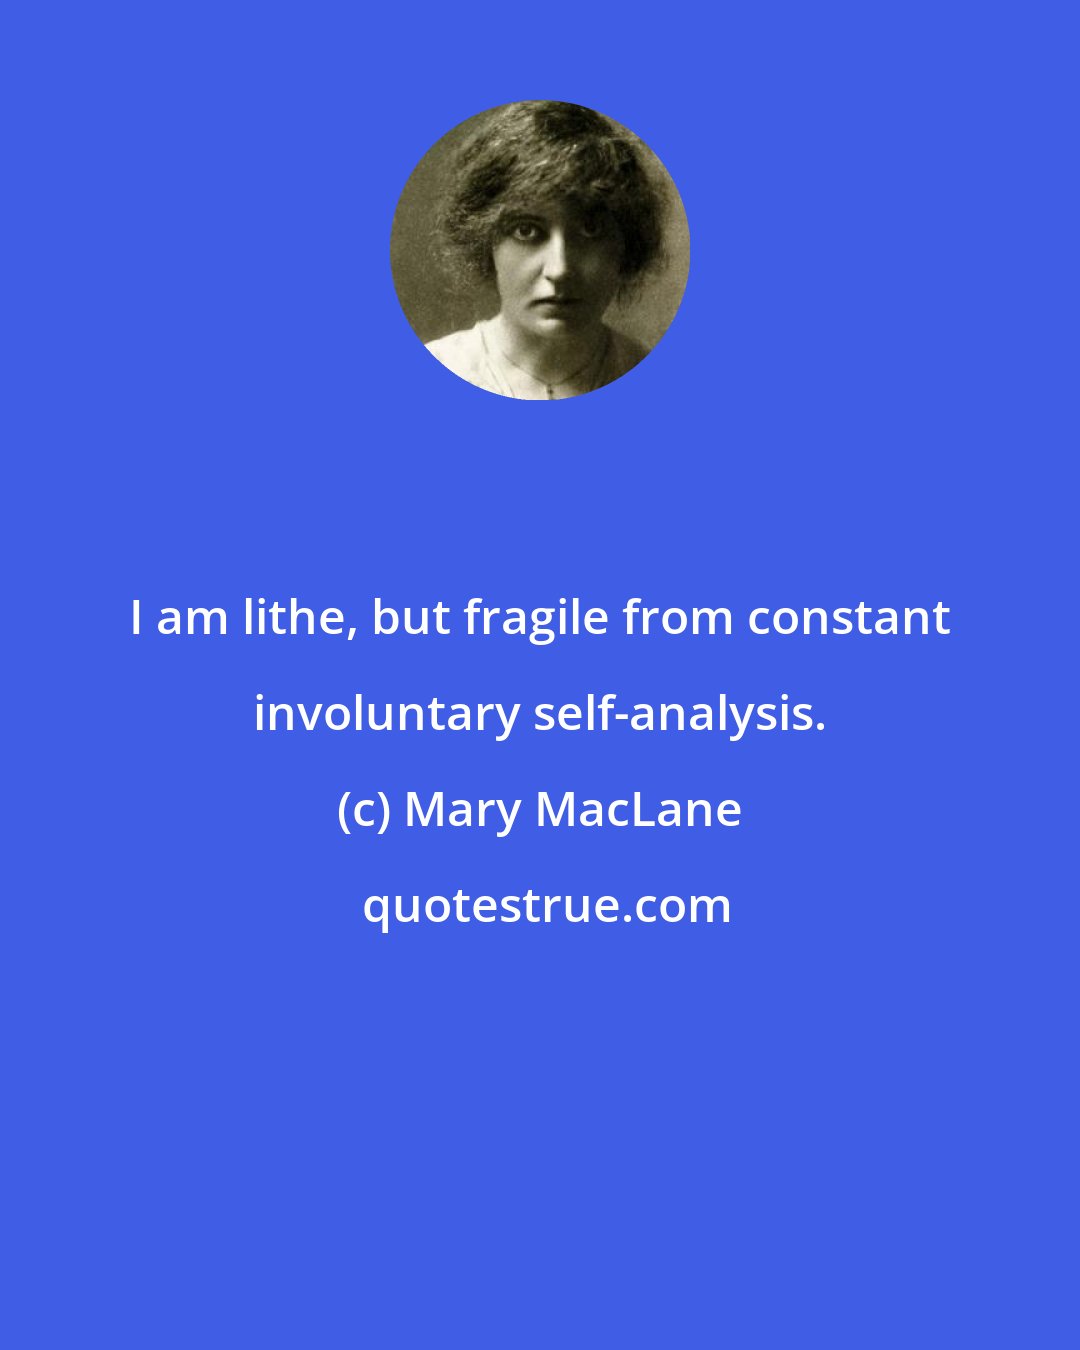 Mary MacLane: I am lithe, but fragile from constant involuntary self-analysis.